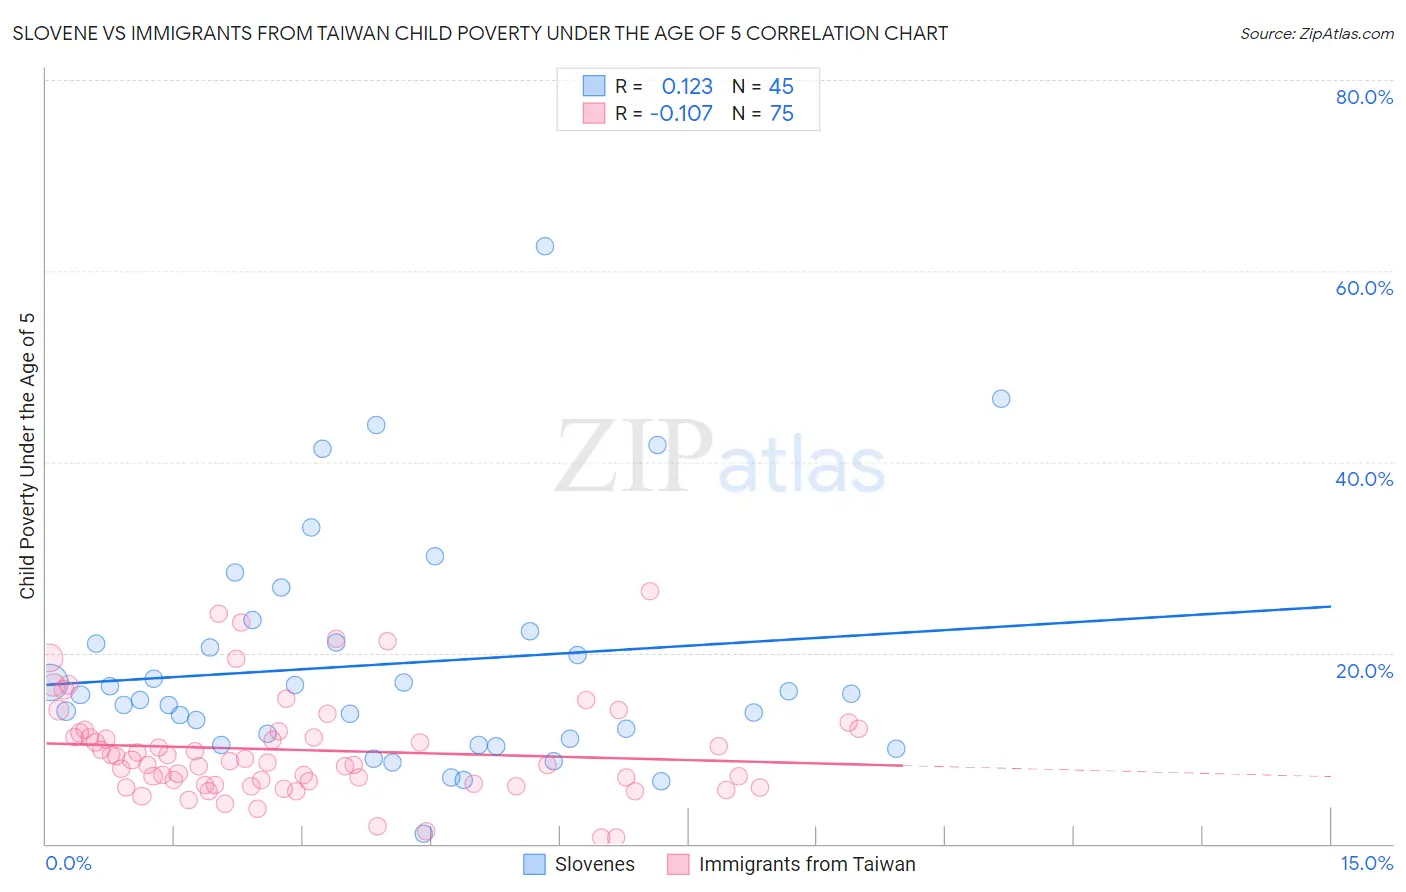 Slovene vs Immigrants from Taiwan Child Poverty Under the Age of 5